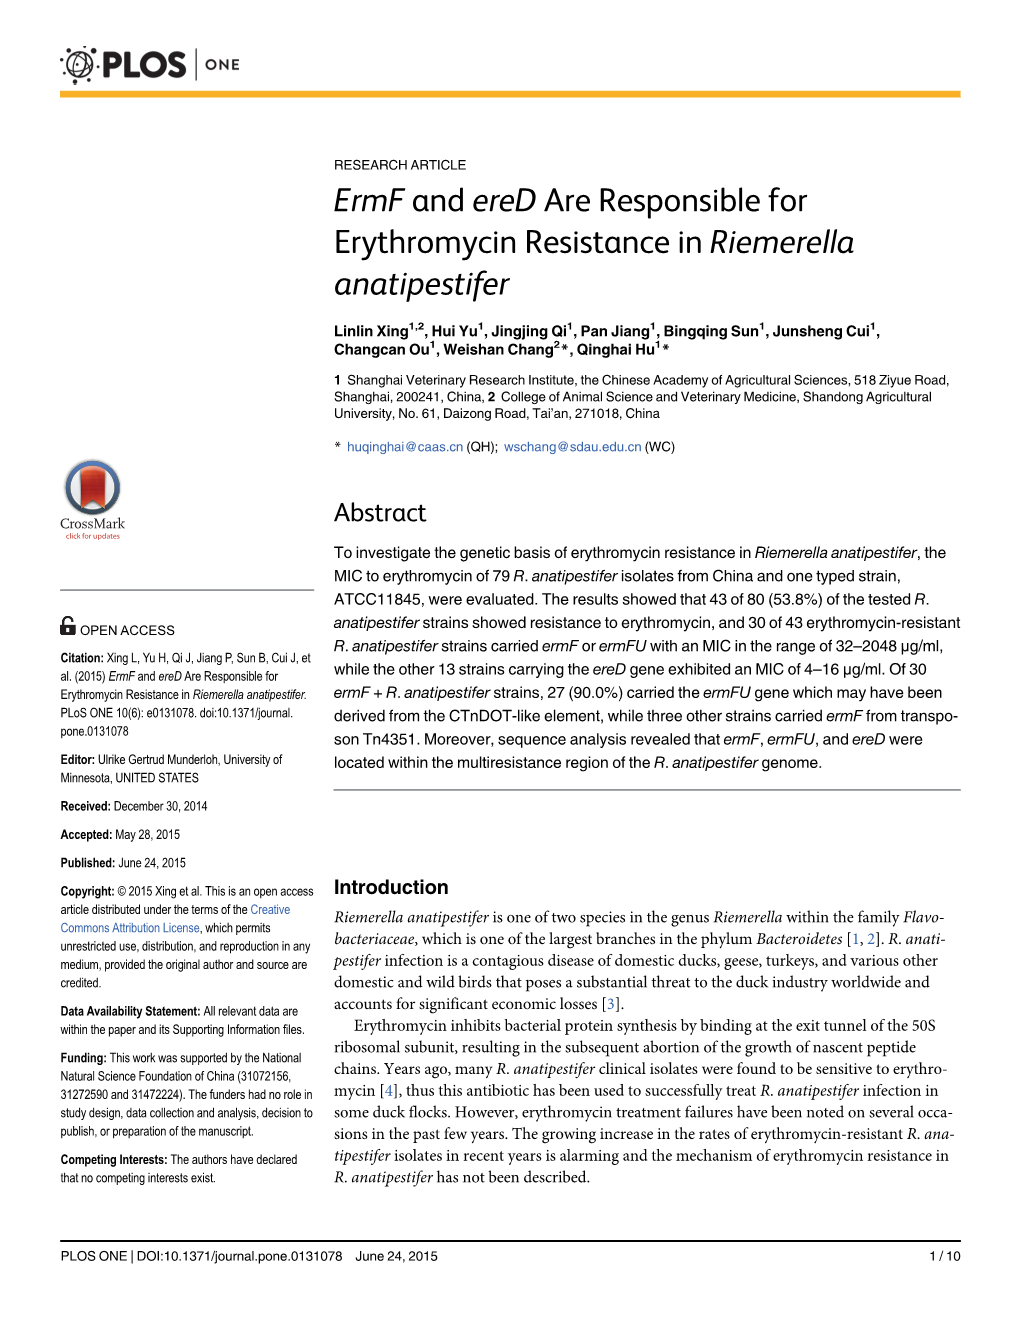 Ermf and Ered Are Responsible for Erythromycin Resistance in Riemerella Anatipestifer